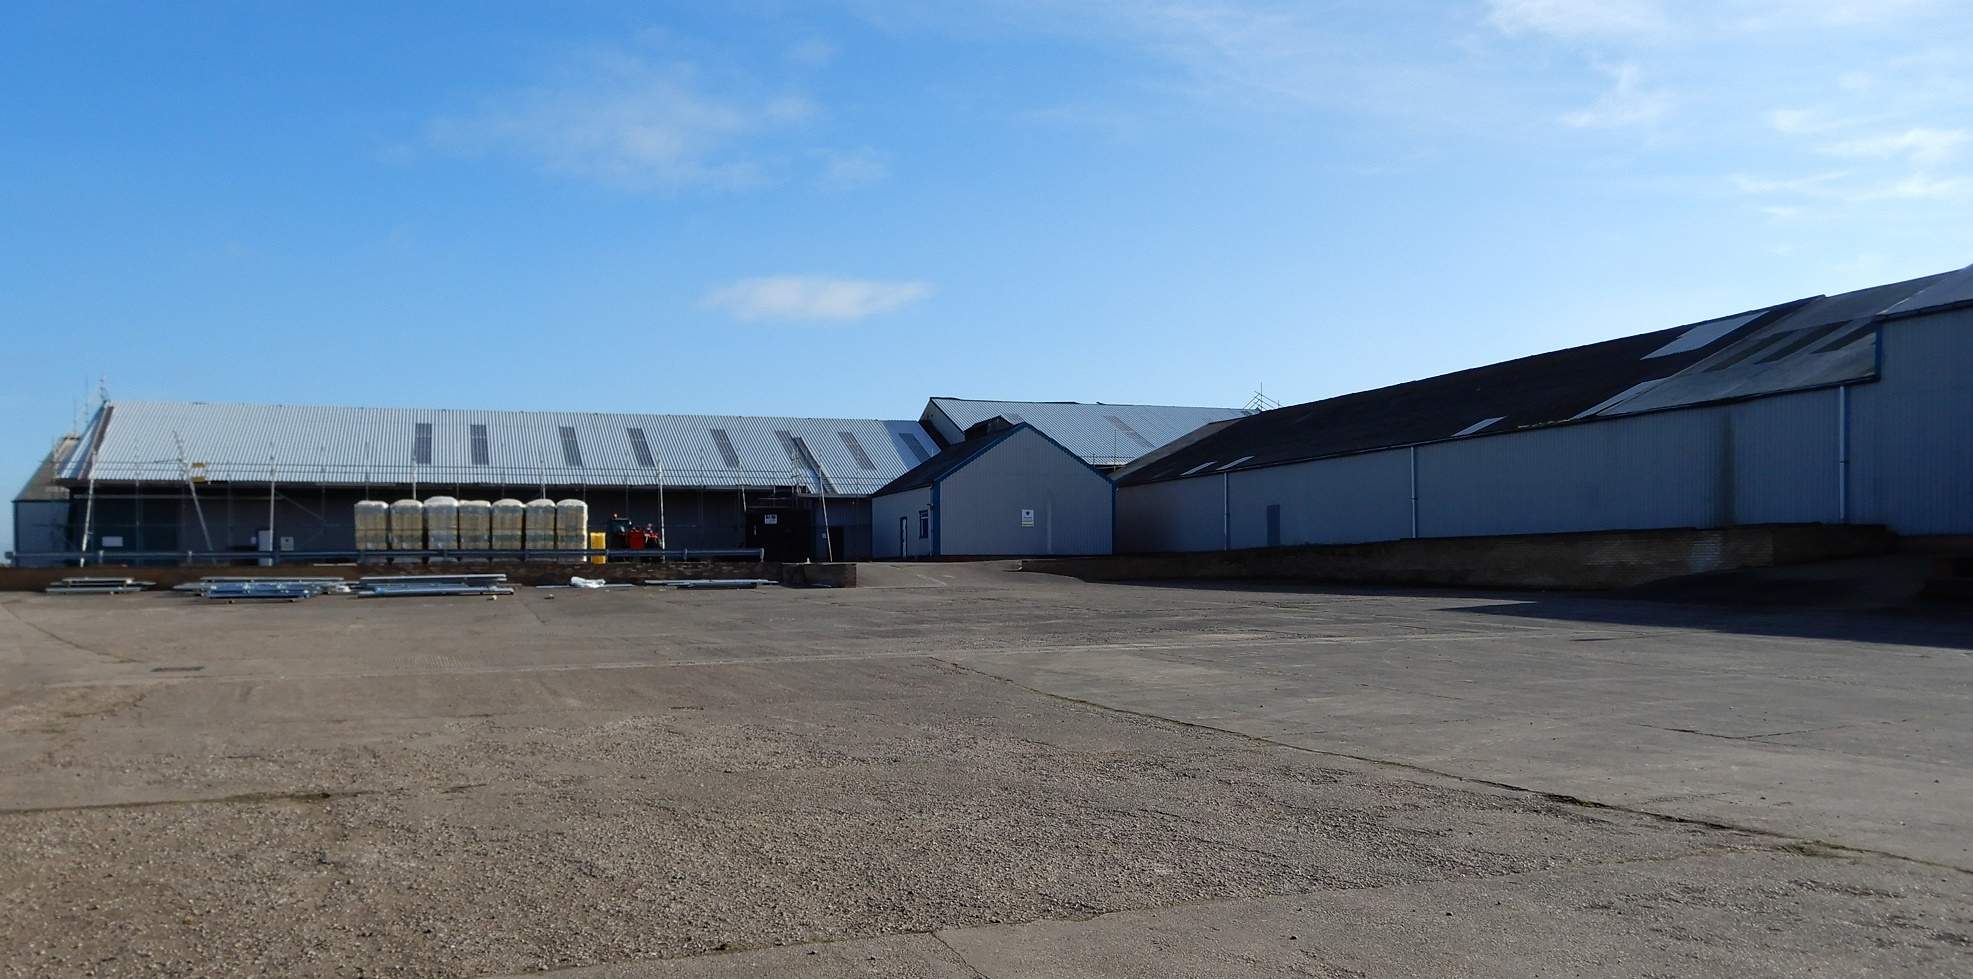 WORK STARTS TO TRANSFORM 28-ACRE LINCOLNSHIRE SITE INTO NEW 5M HEADQUARTERS